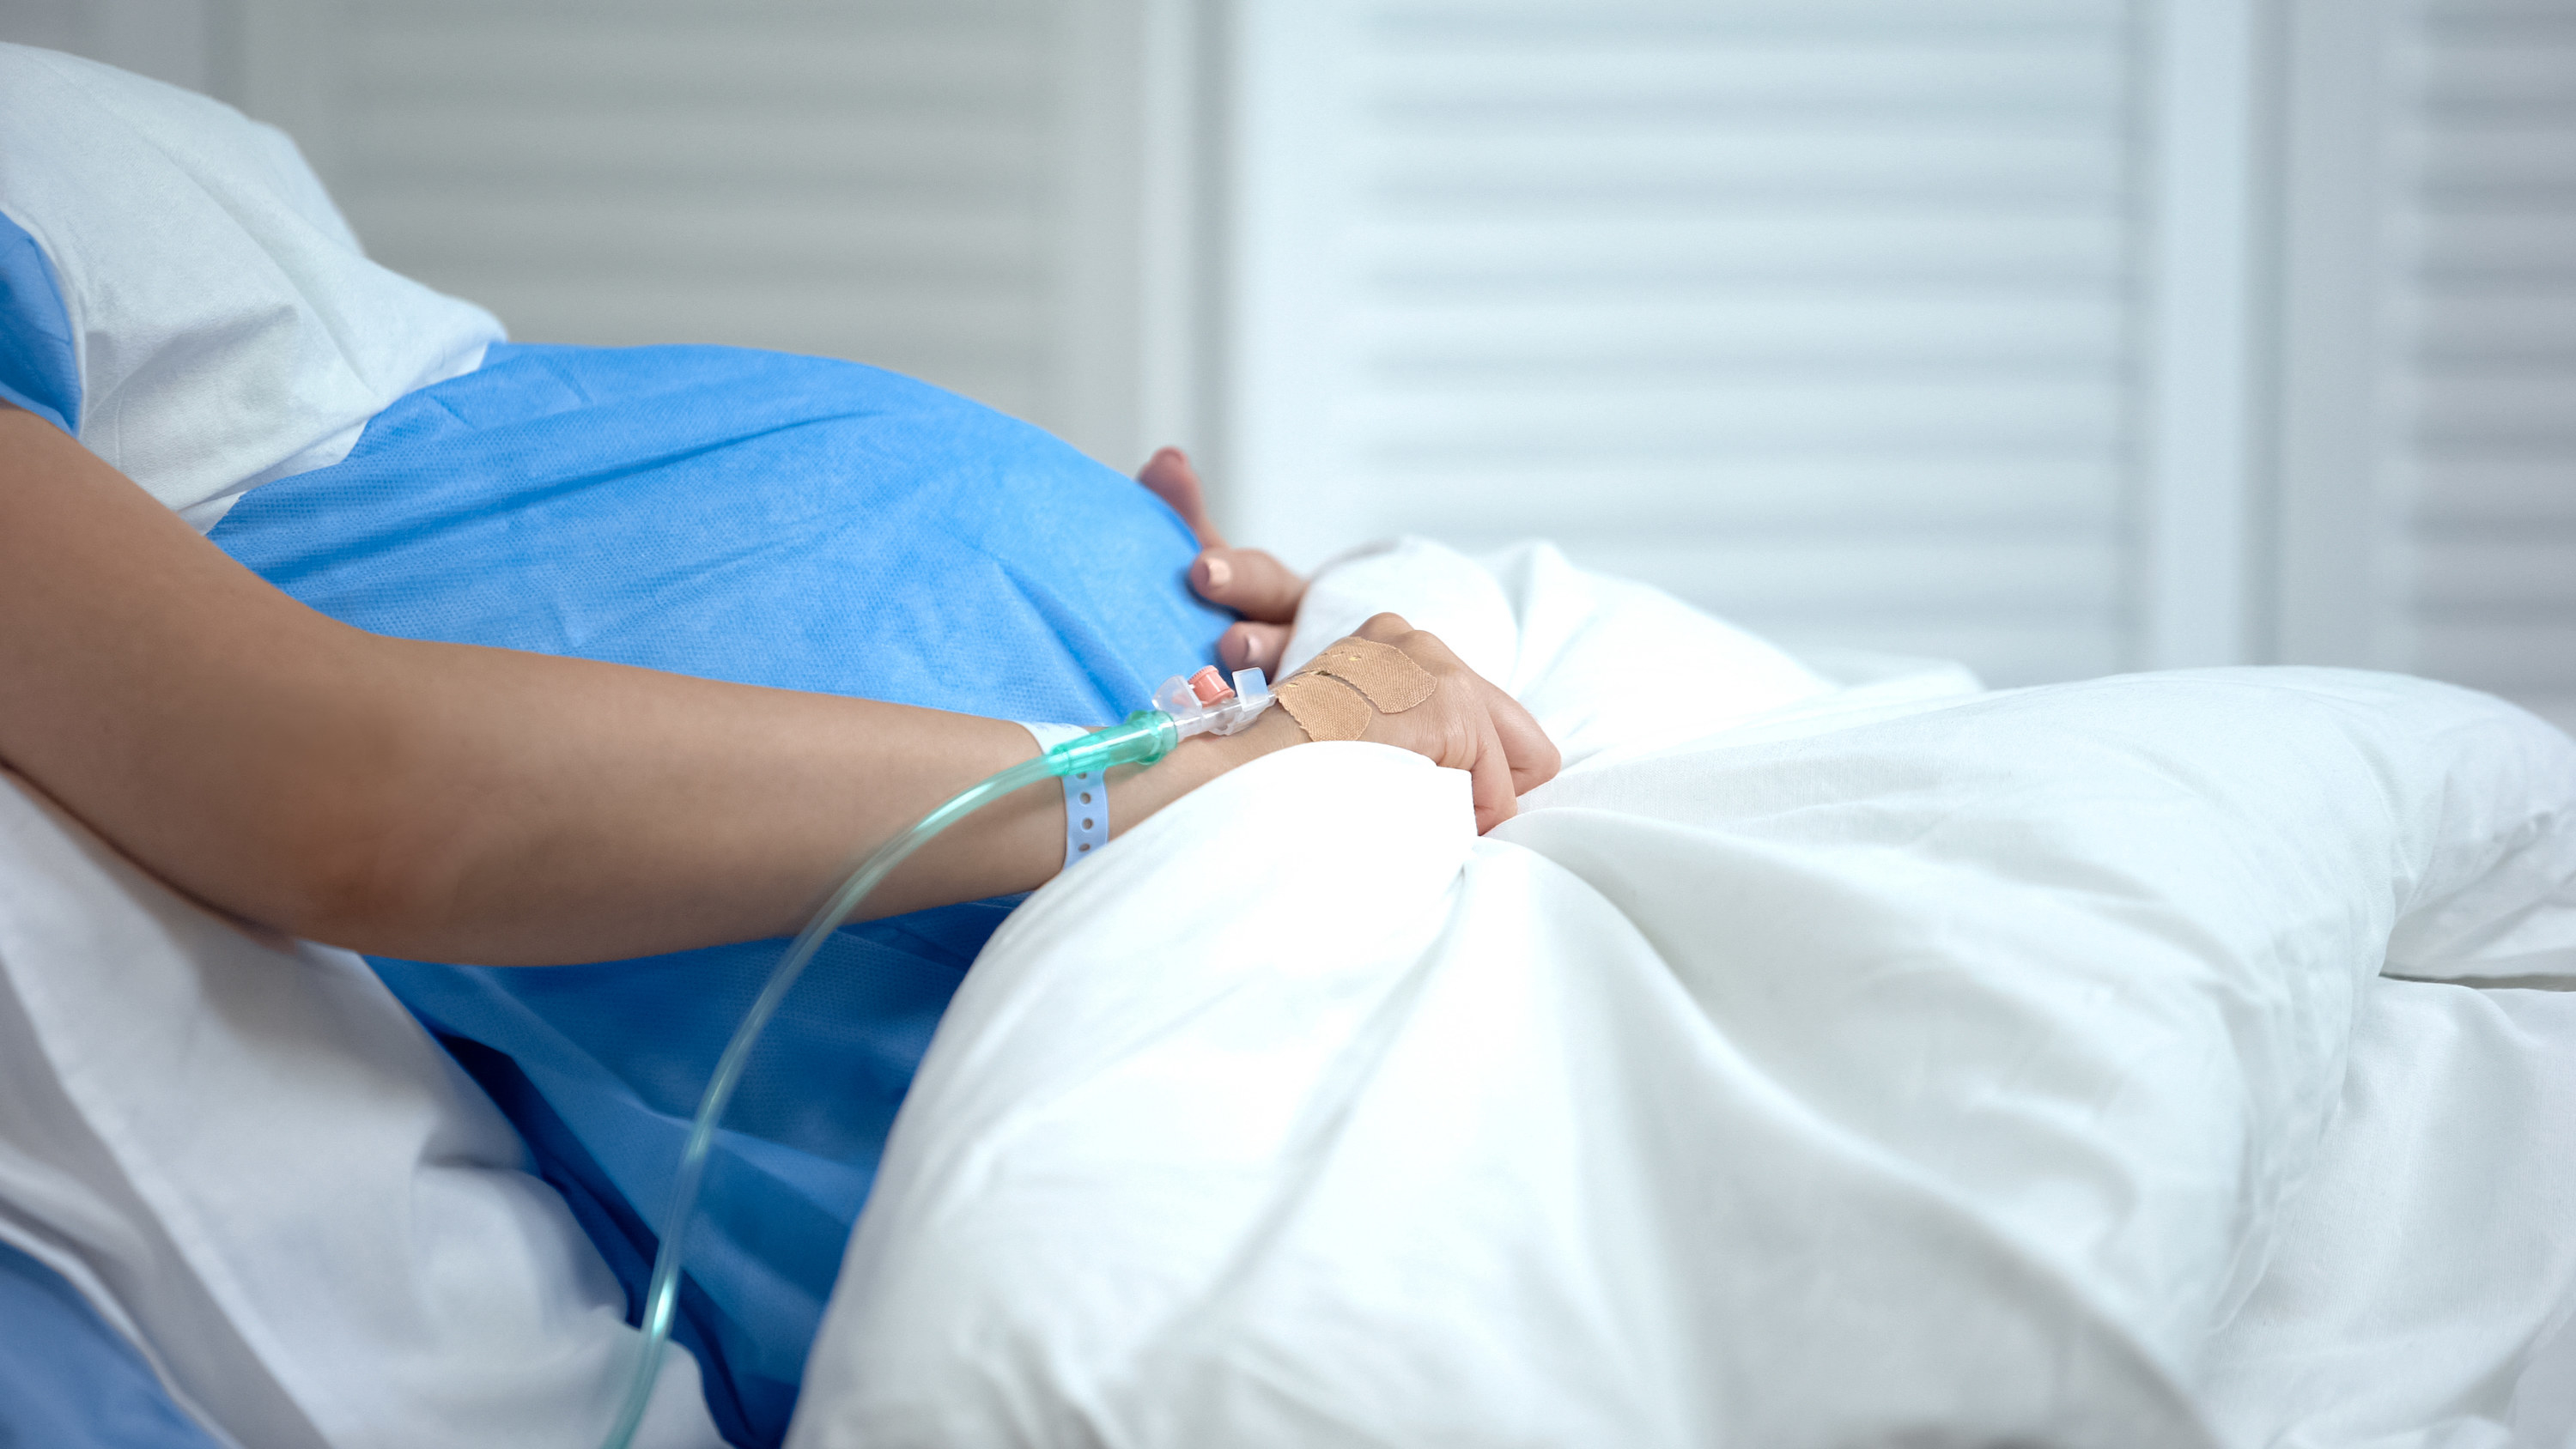 A pregnant person holds their belly in a hospital bed